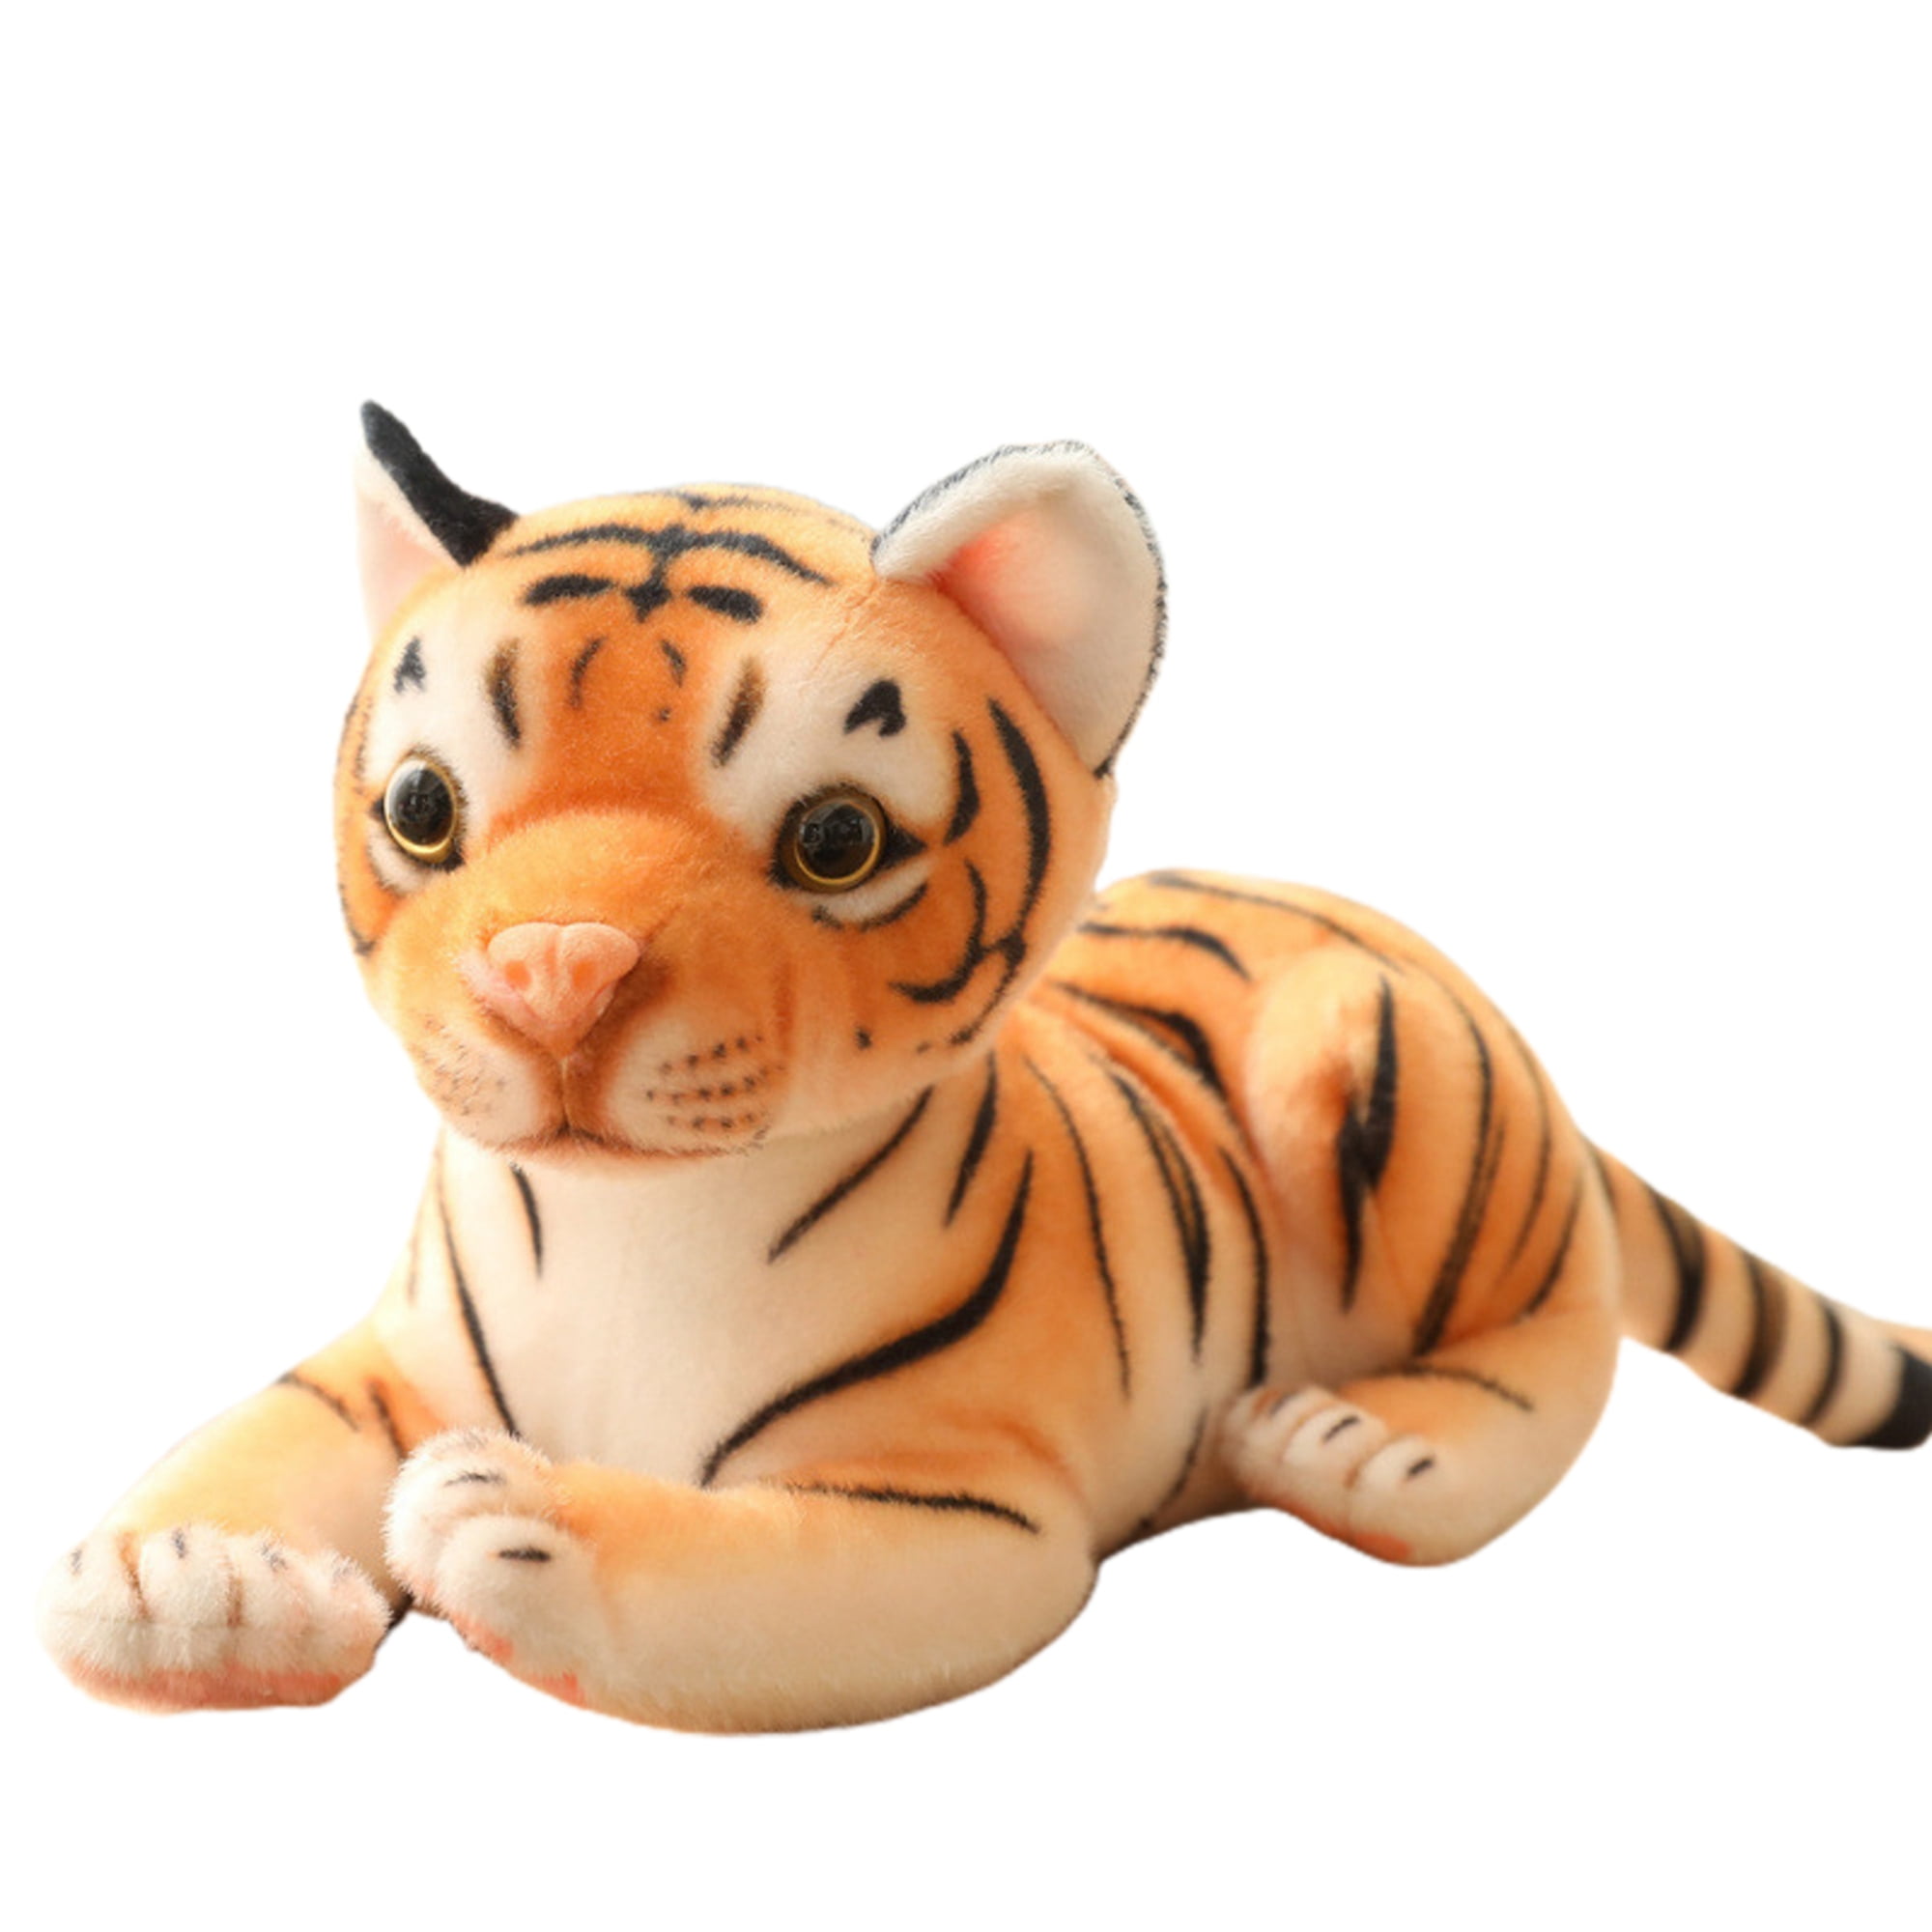 NICI Sheep Tiger 9.8 in Soft Plush Stuffed Doll Toy For Kids Gift 25cm 